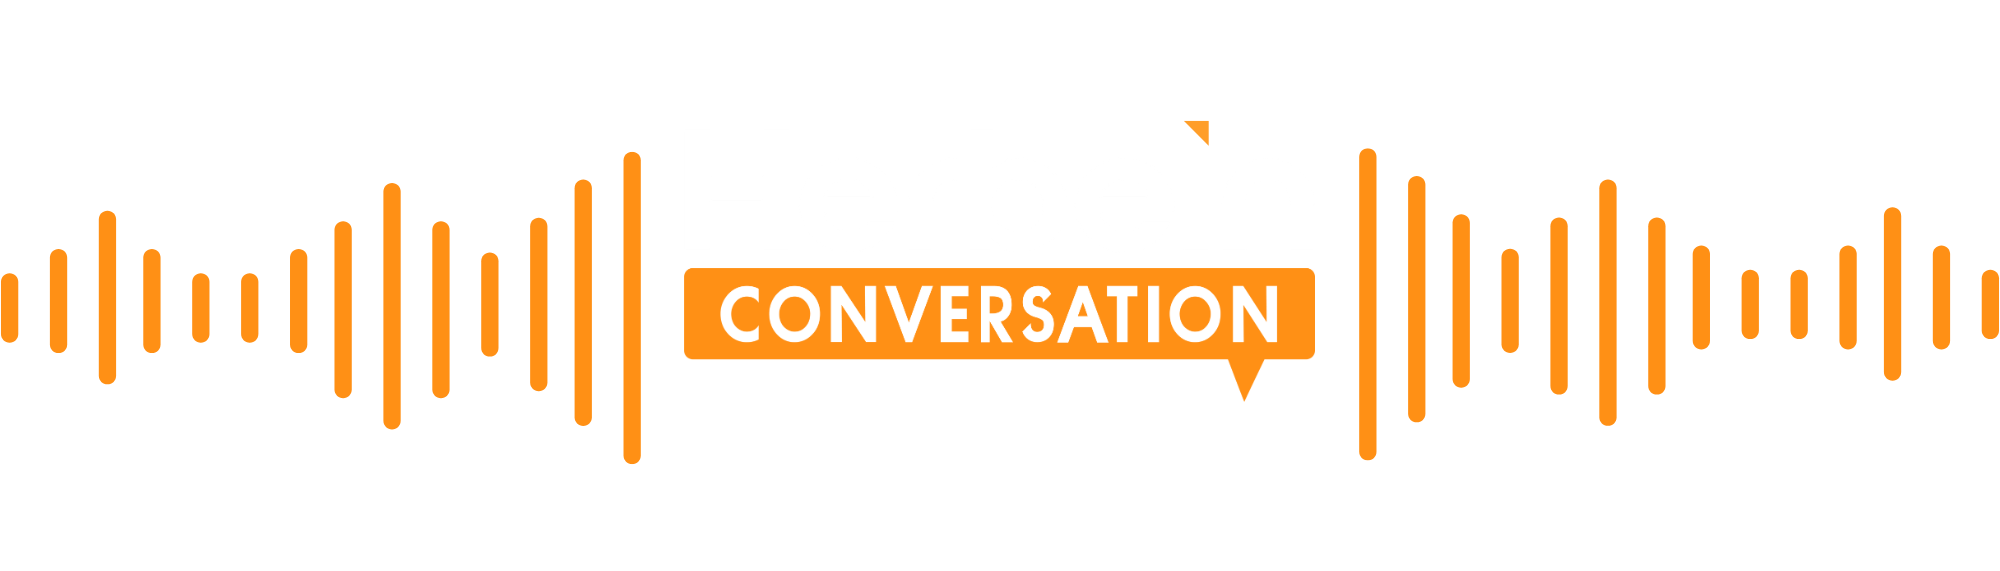 Herbein Podcast - Homepage (3)